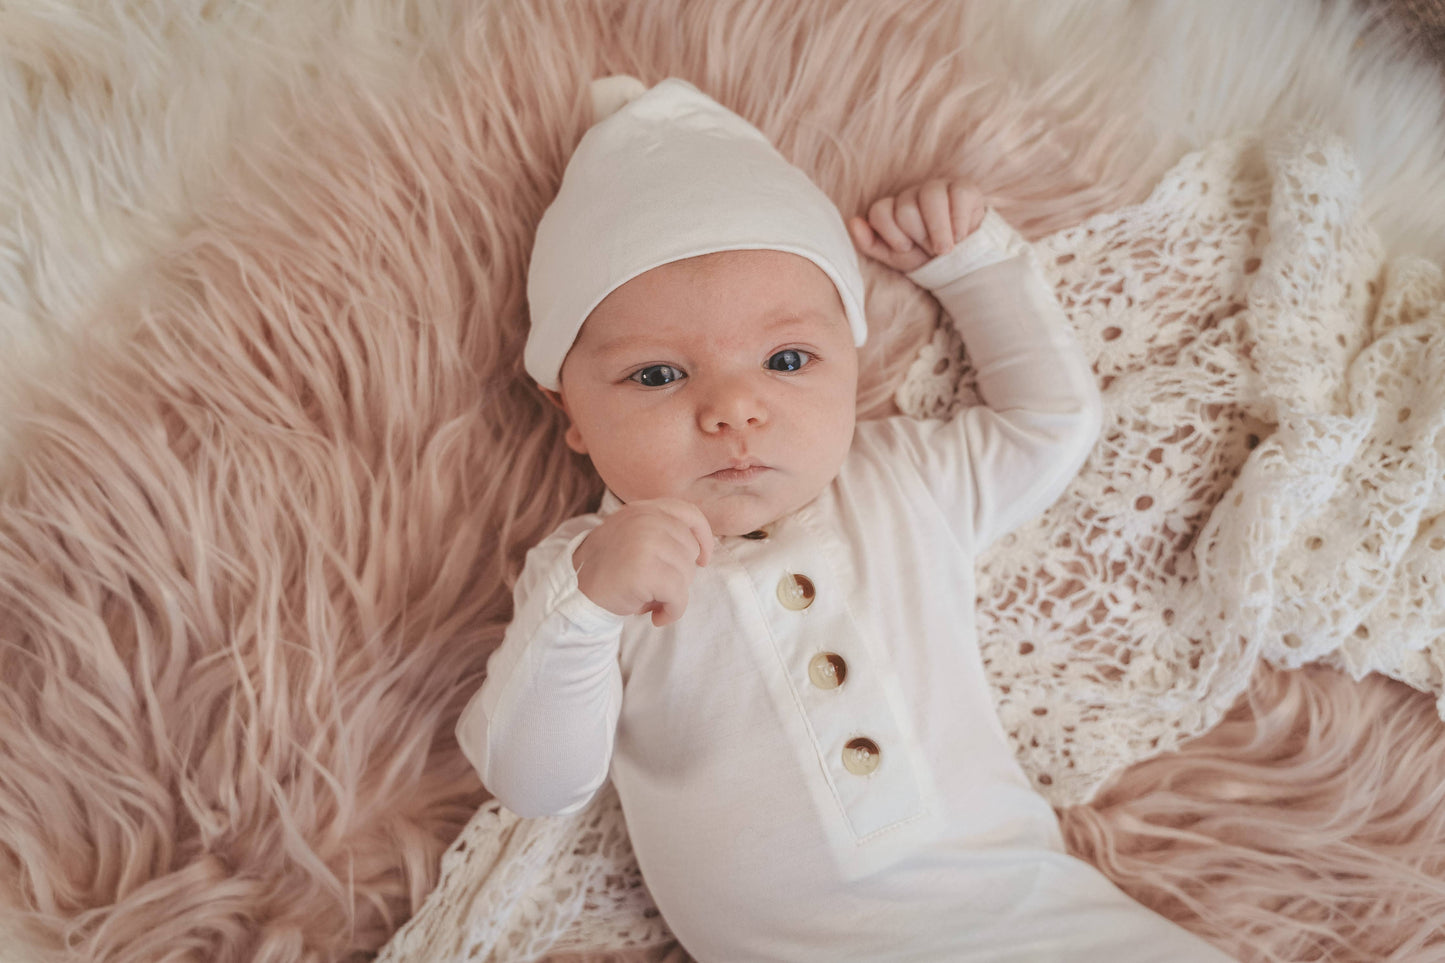 Knotted Baby Gown Set (Newborn - 3 mo.) - Creamy White: Hat